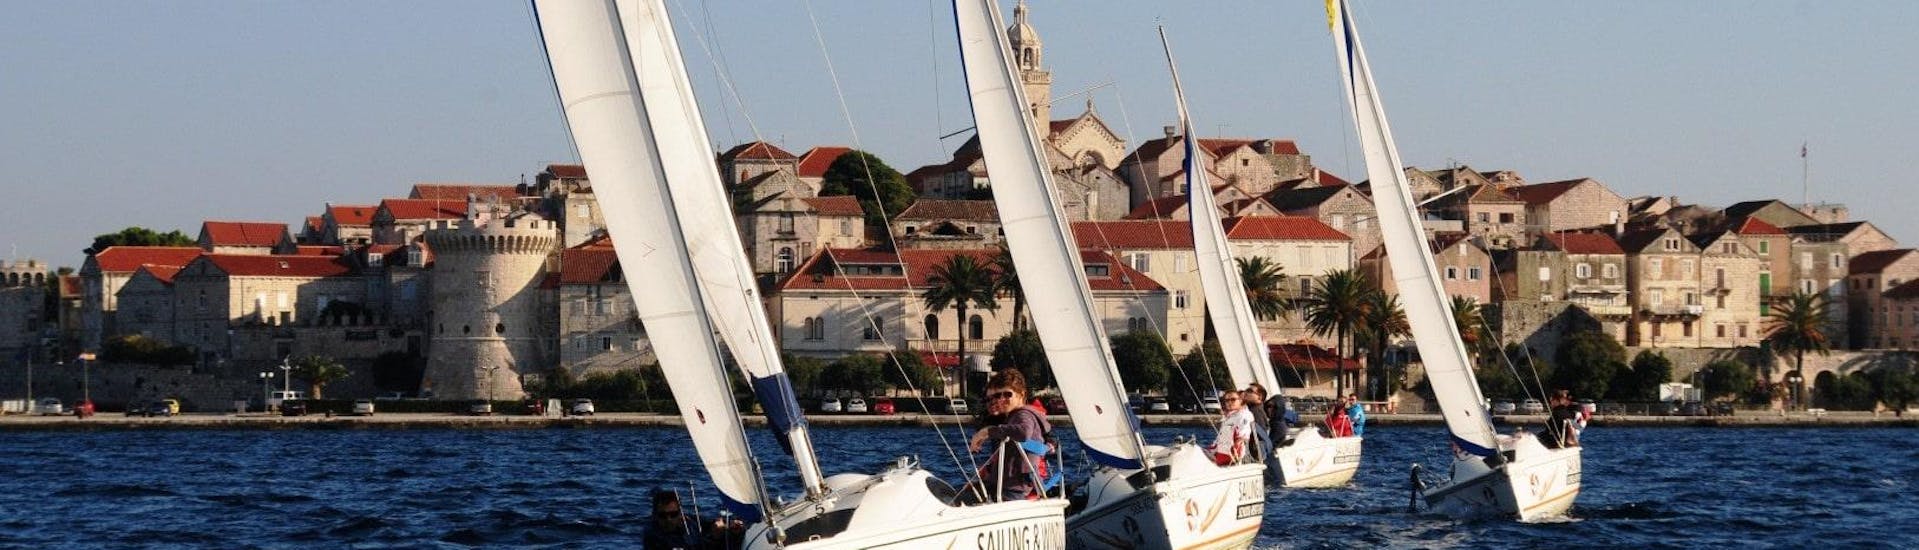 Full-day Sailing Yacht Trip from Korčula with Swimming.